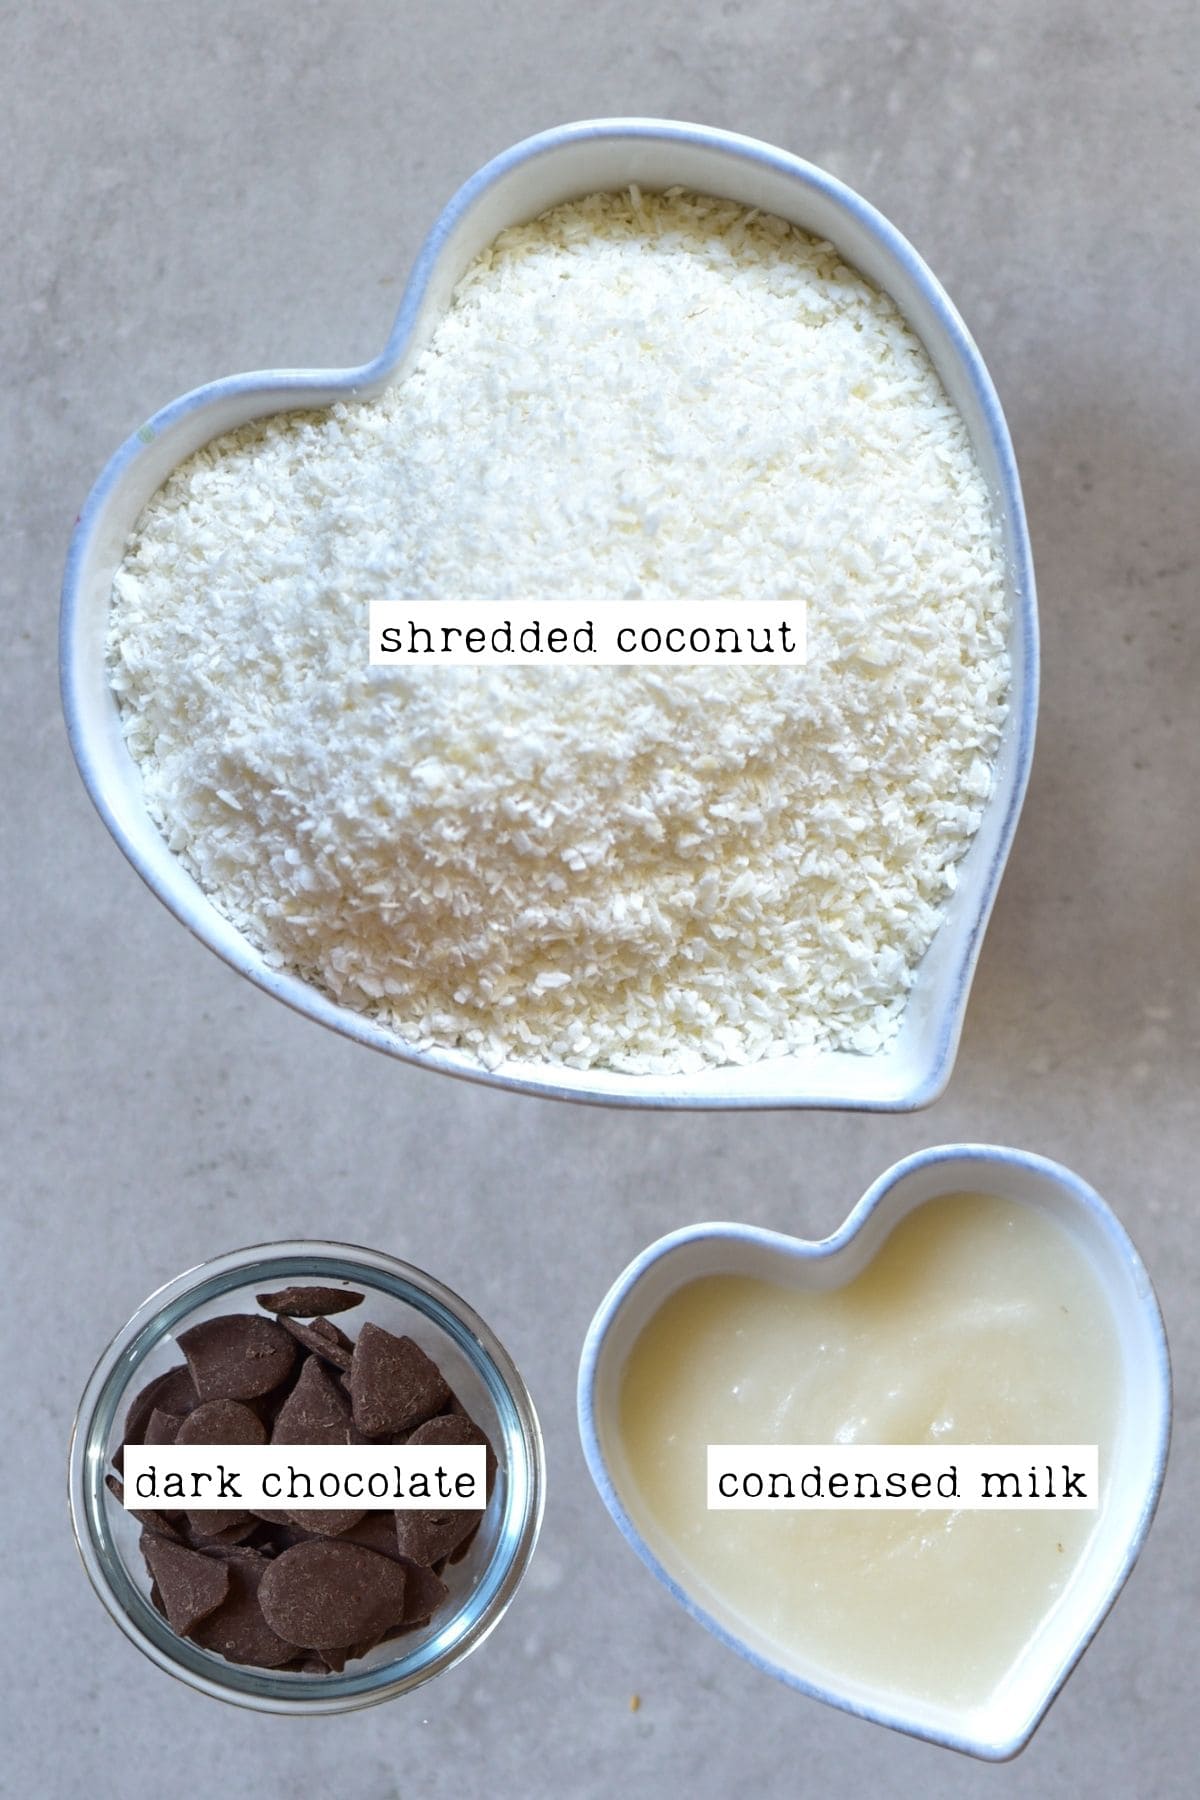 ngredients for chocolate coconut balls